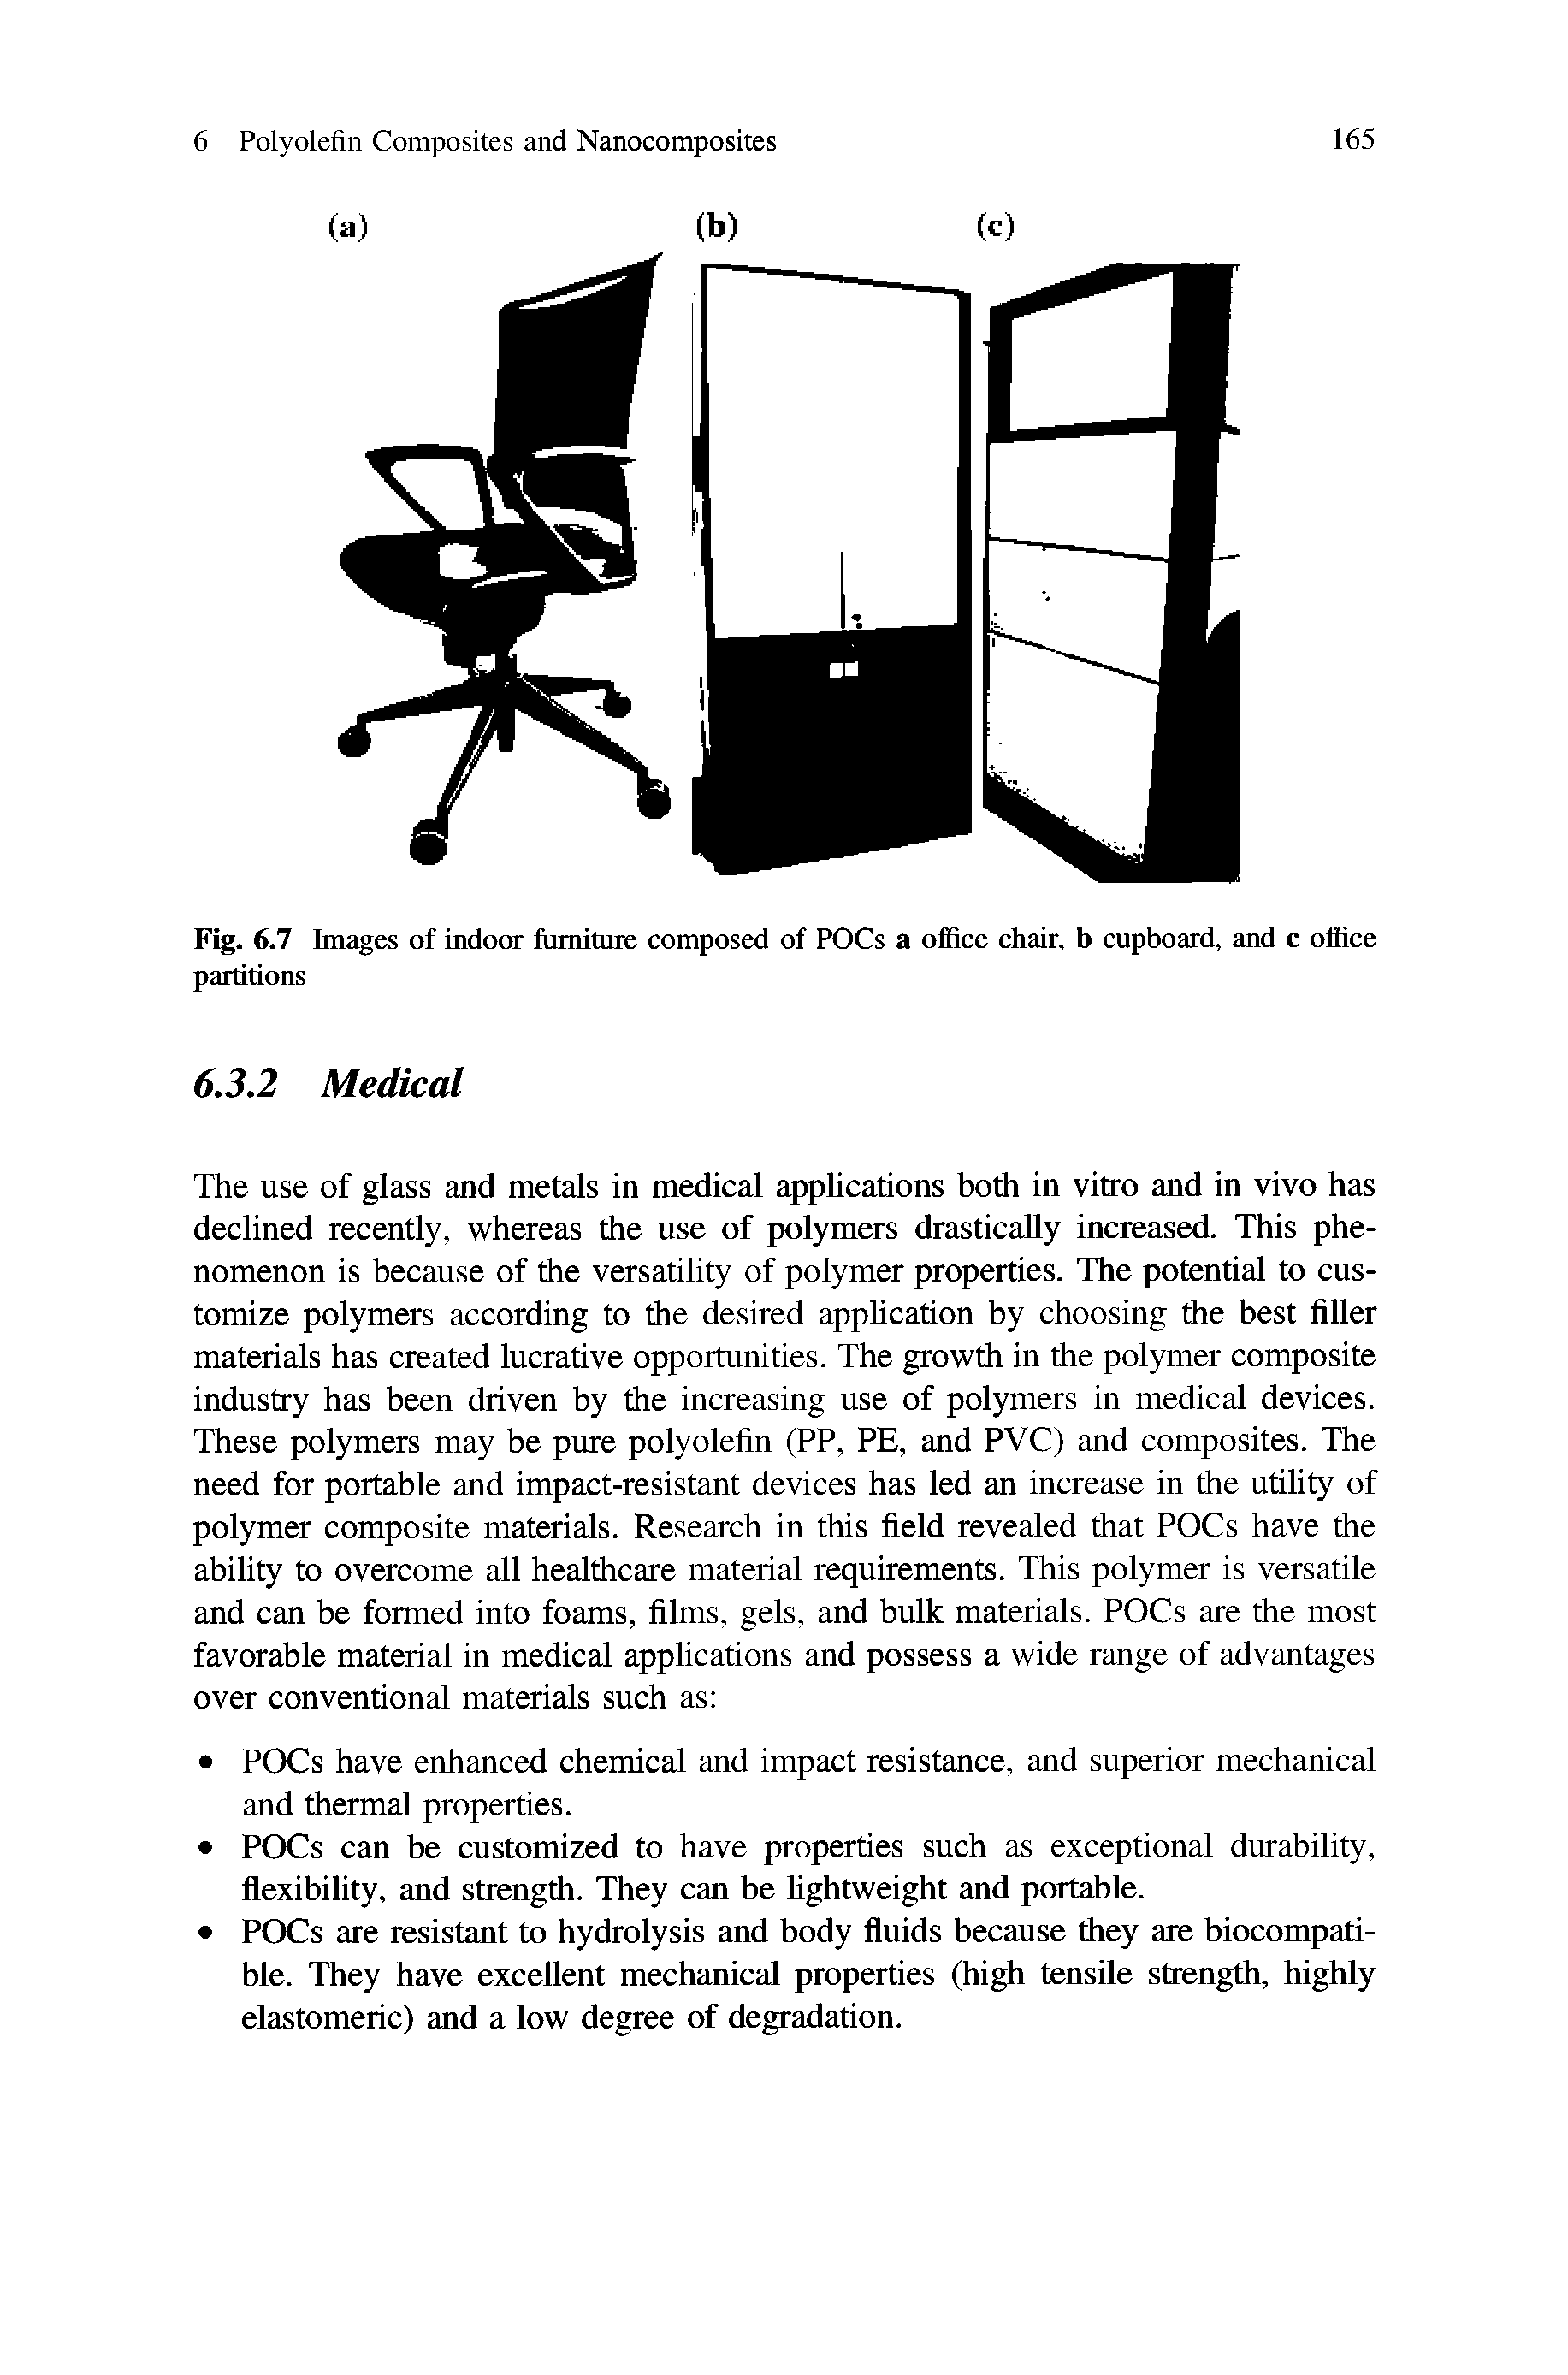 Fig. 6.7 Images of indoor furniture composed of POCs a office chair, b cupboard, and c office...